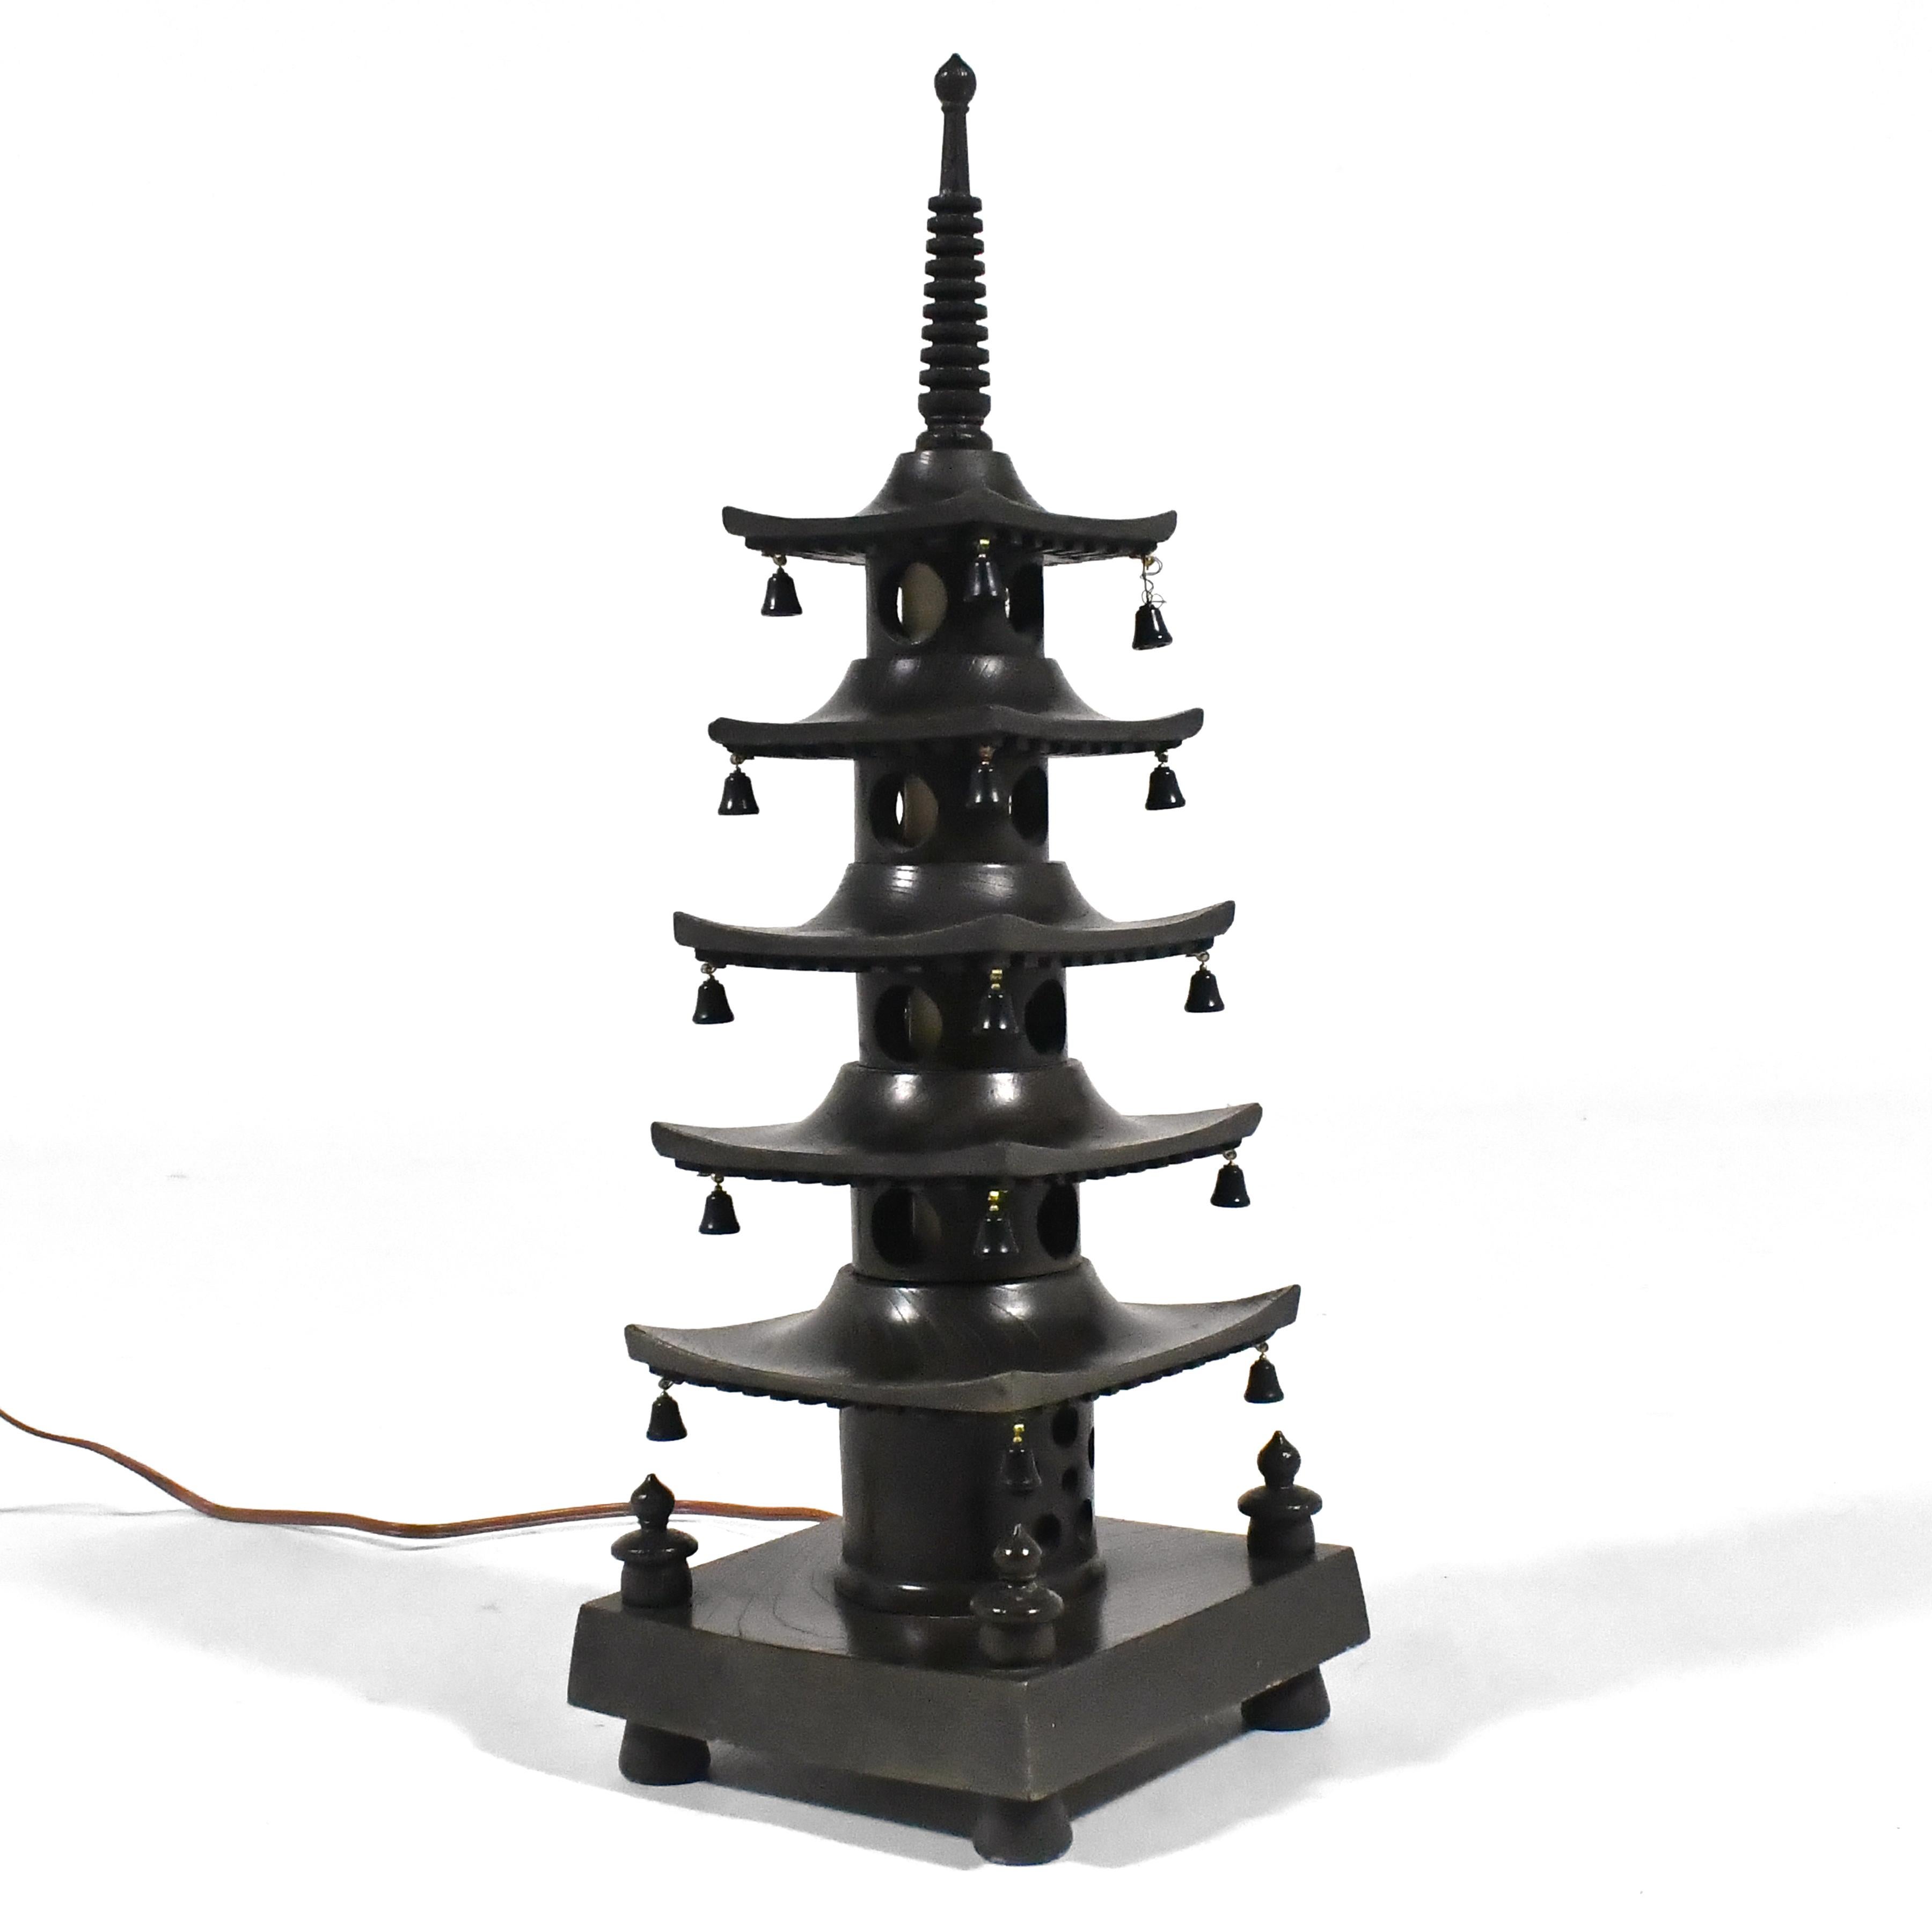 This lovely little lamp in the form of a Japanese pagoda, adds a charming touch to any room. An internal light glows from within, illuminating the windows.

Made in Japan and marked with label on the bottom.

19